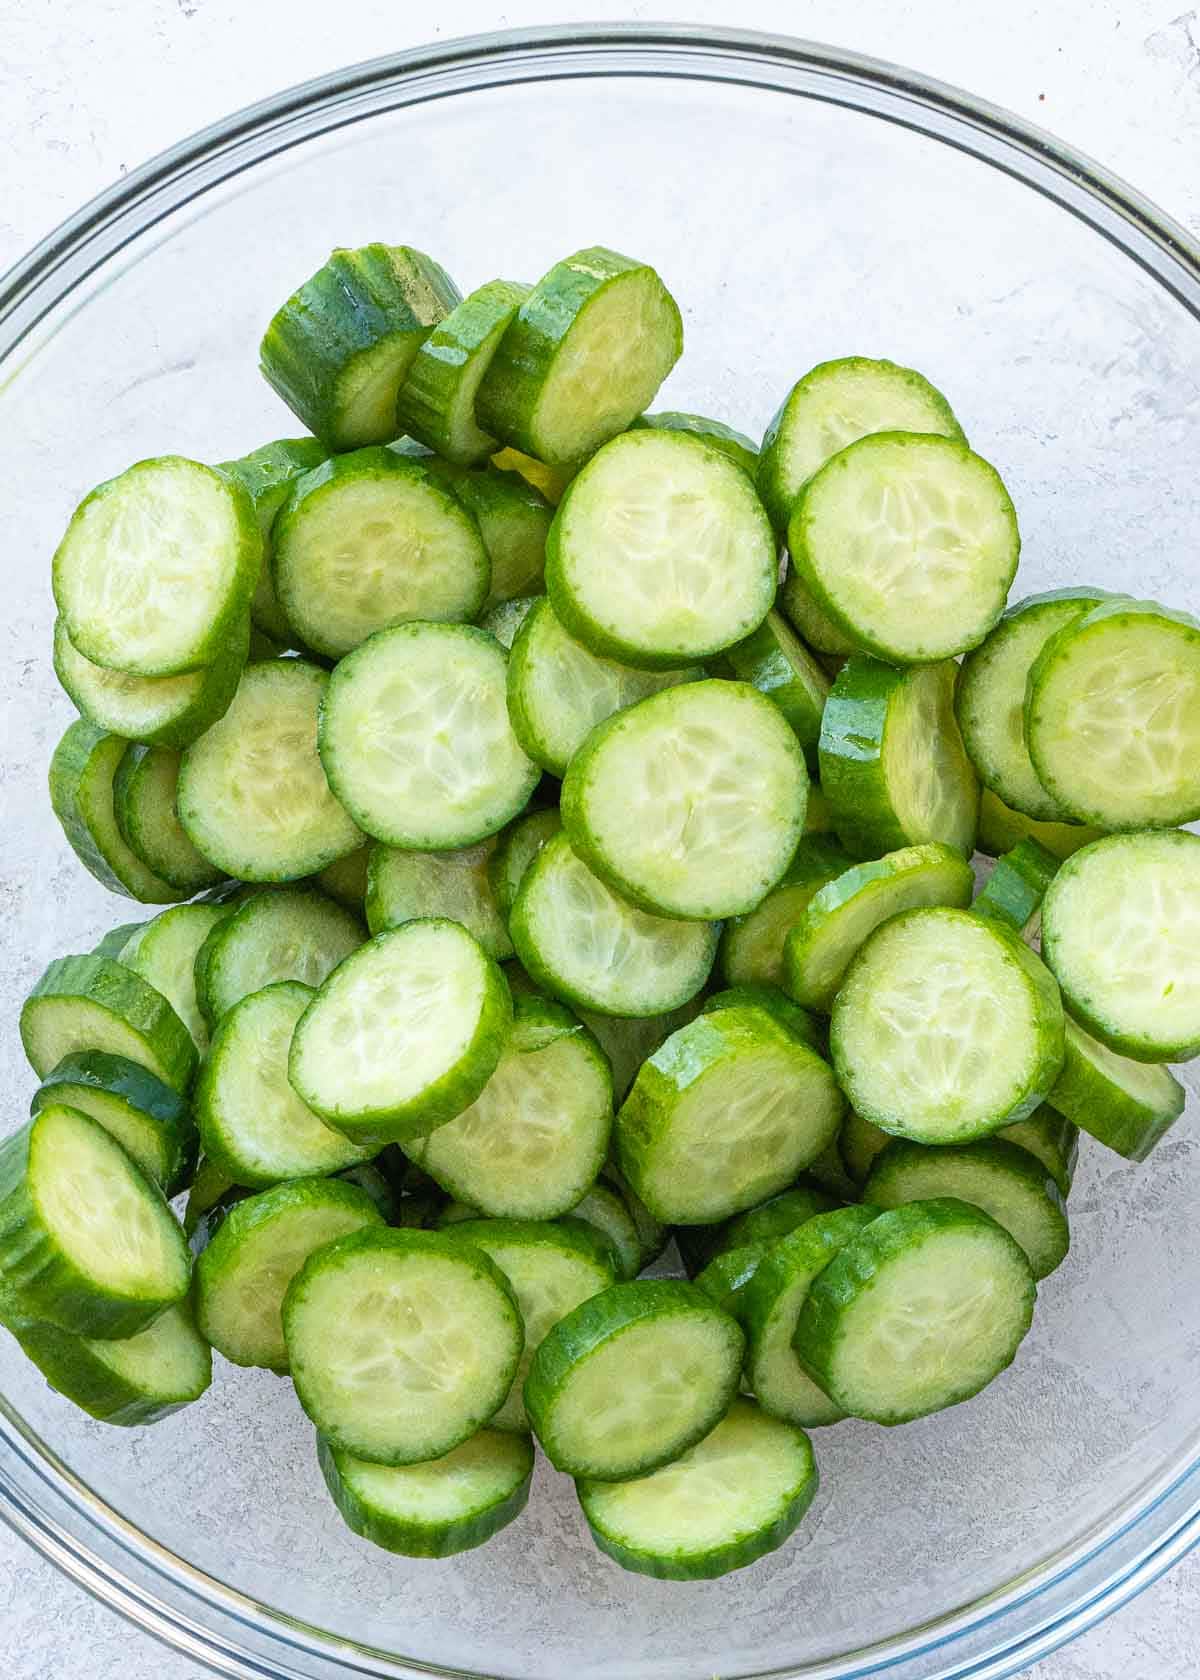 Overhead view of sliced cucumbers in a glass bowl